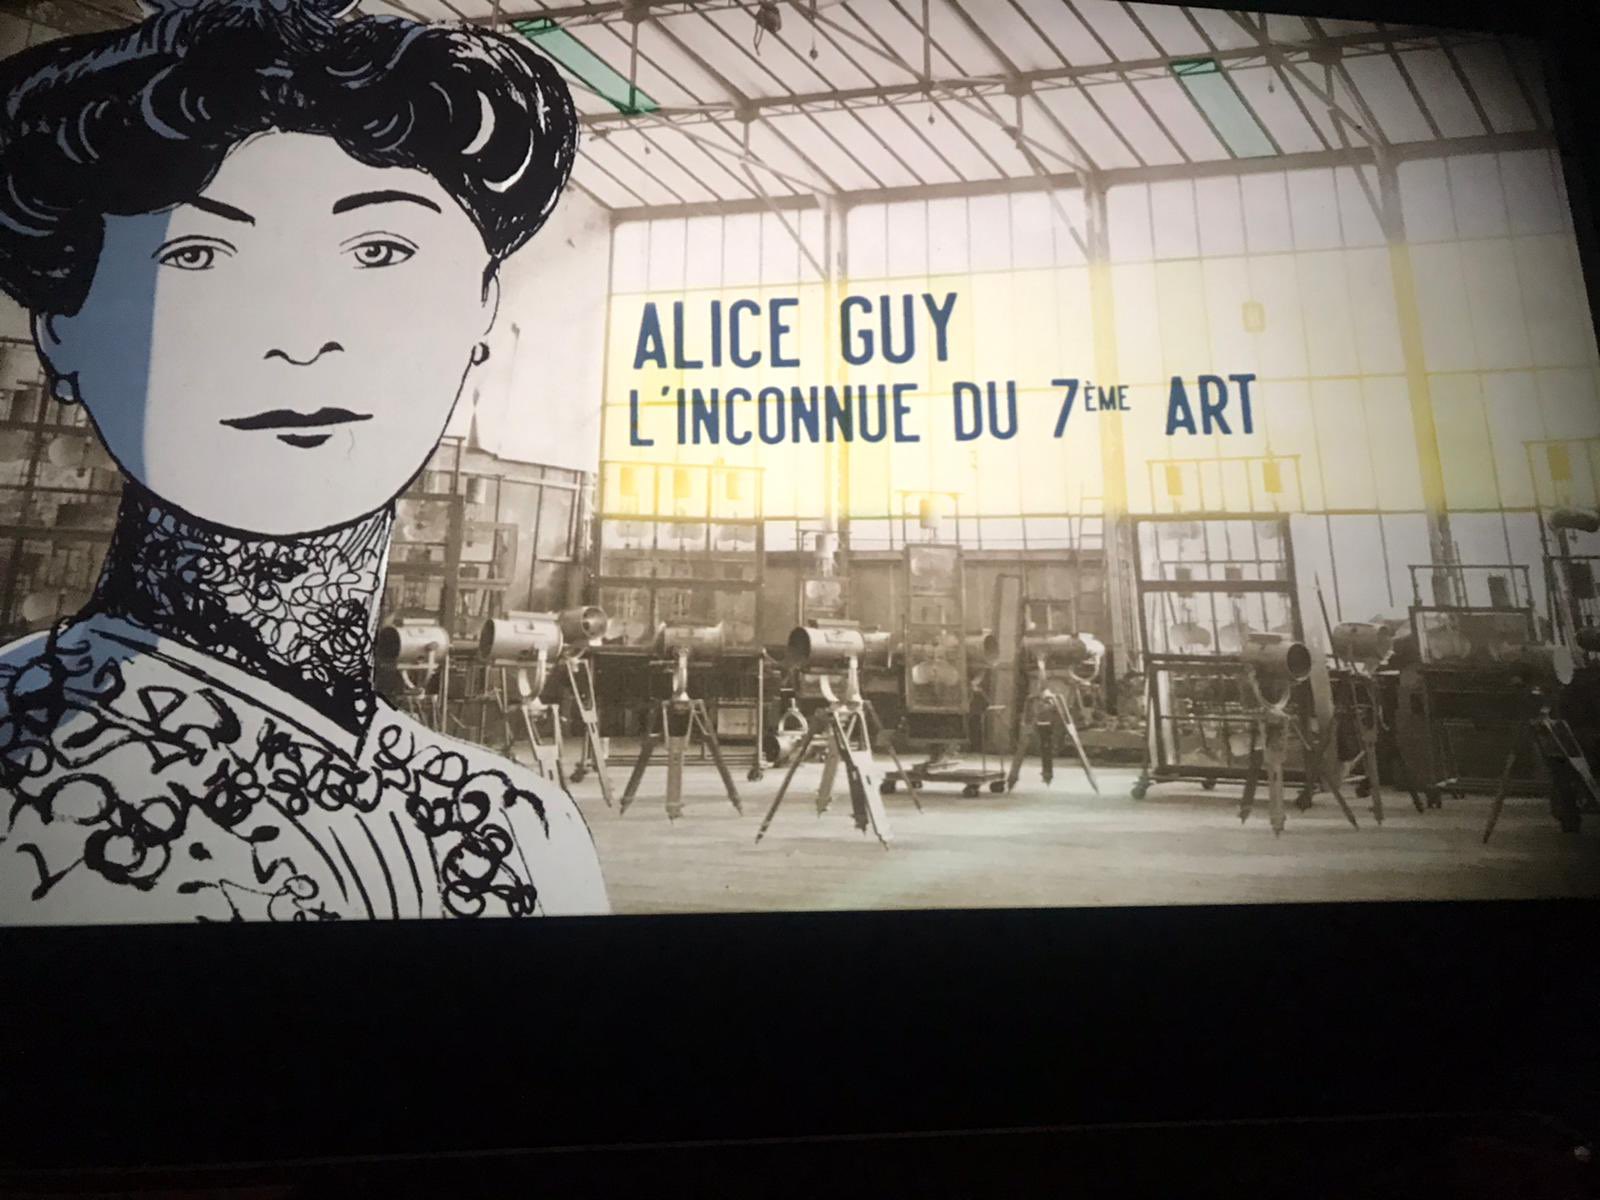 Alice Guy, the unknown of the 7th art